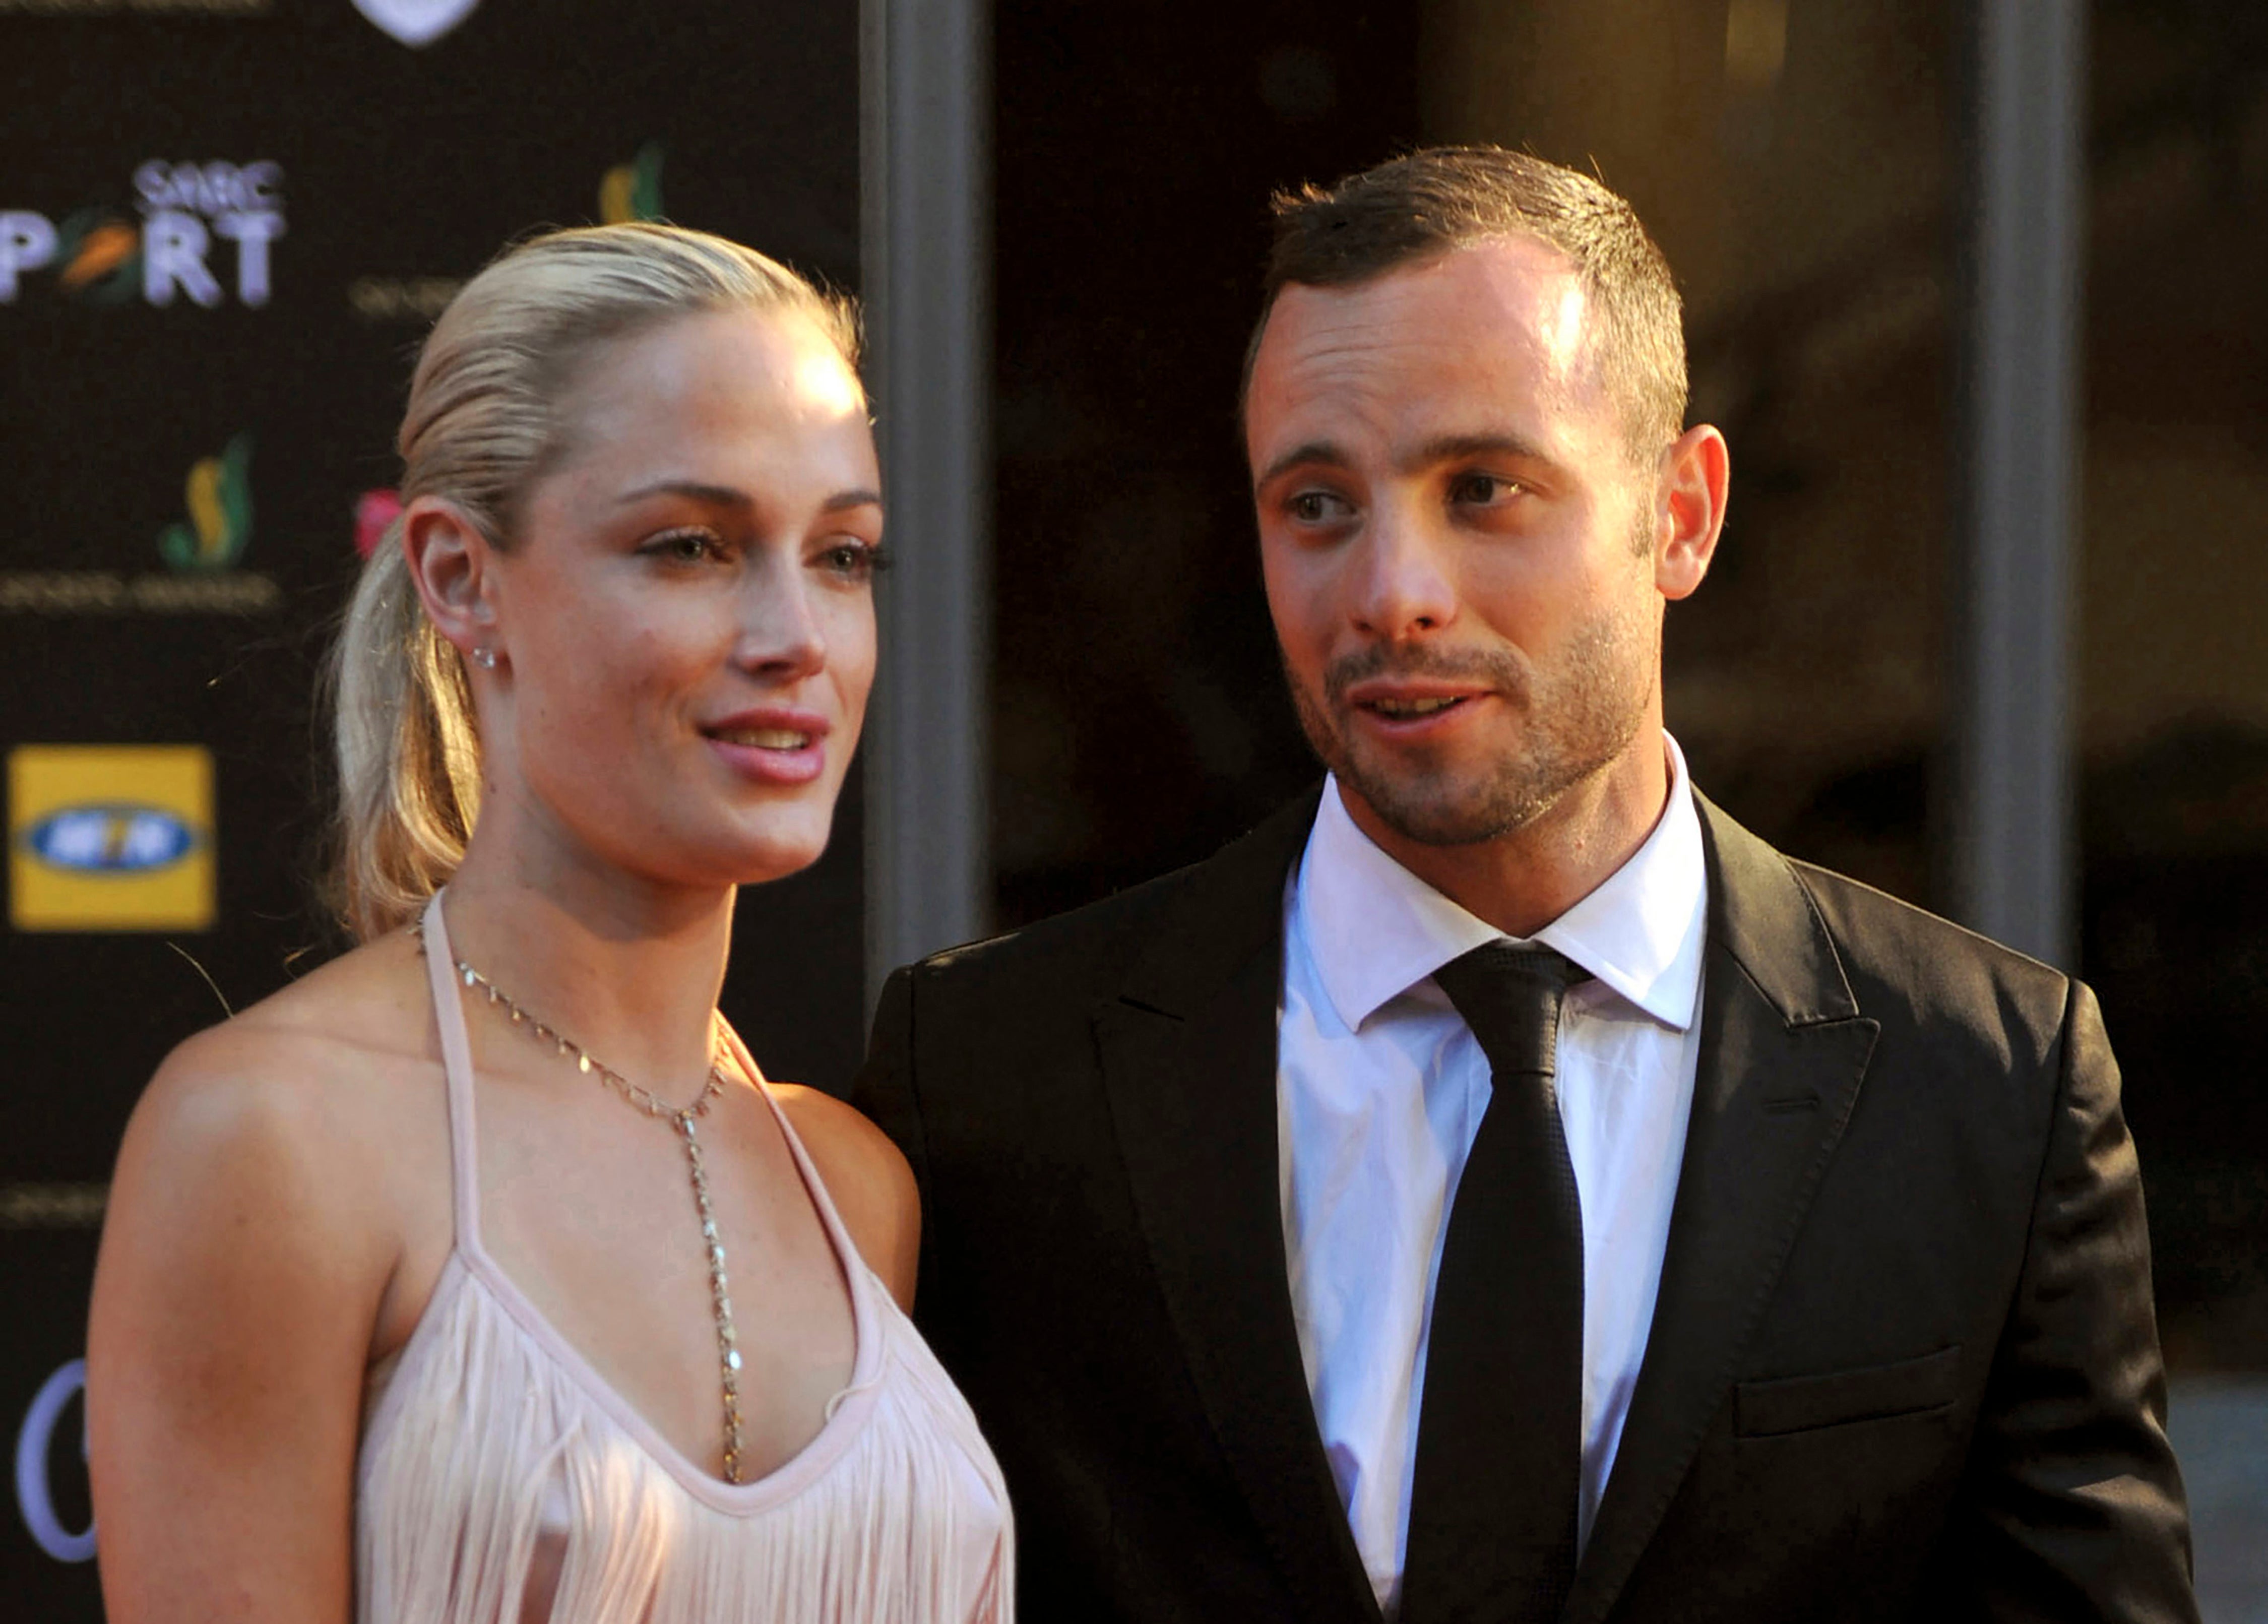 Oscar Pistorius is serving a prison sentence of more than 13 years for the murder of his girlfriend Reeva Steenkamp